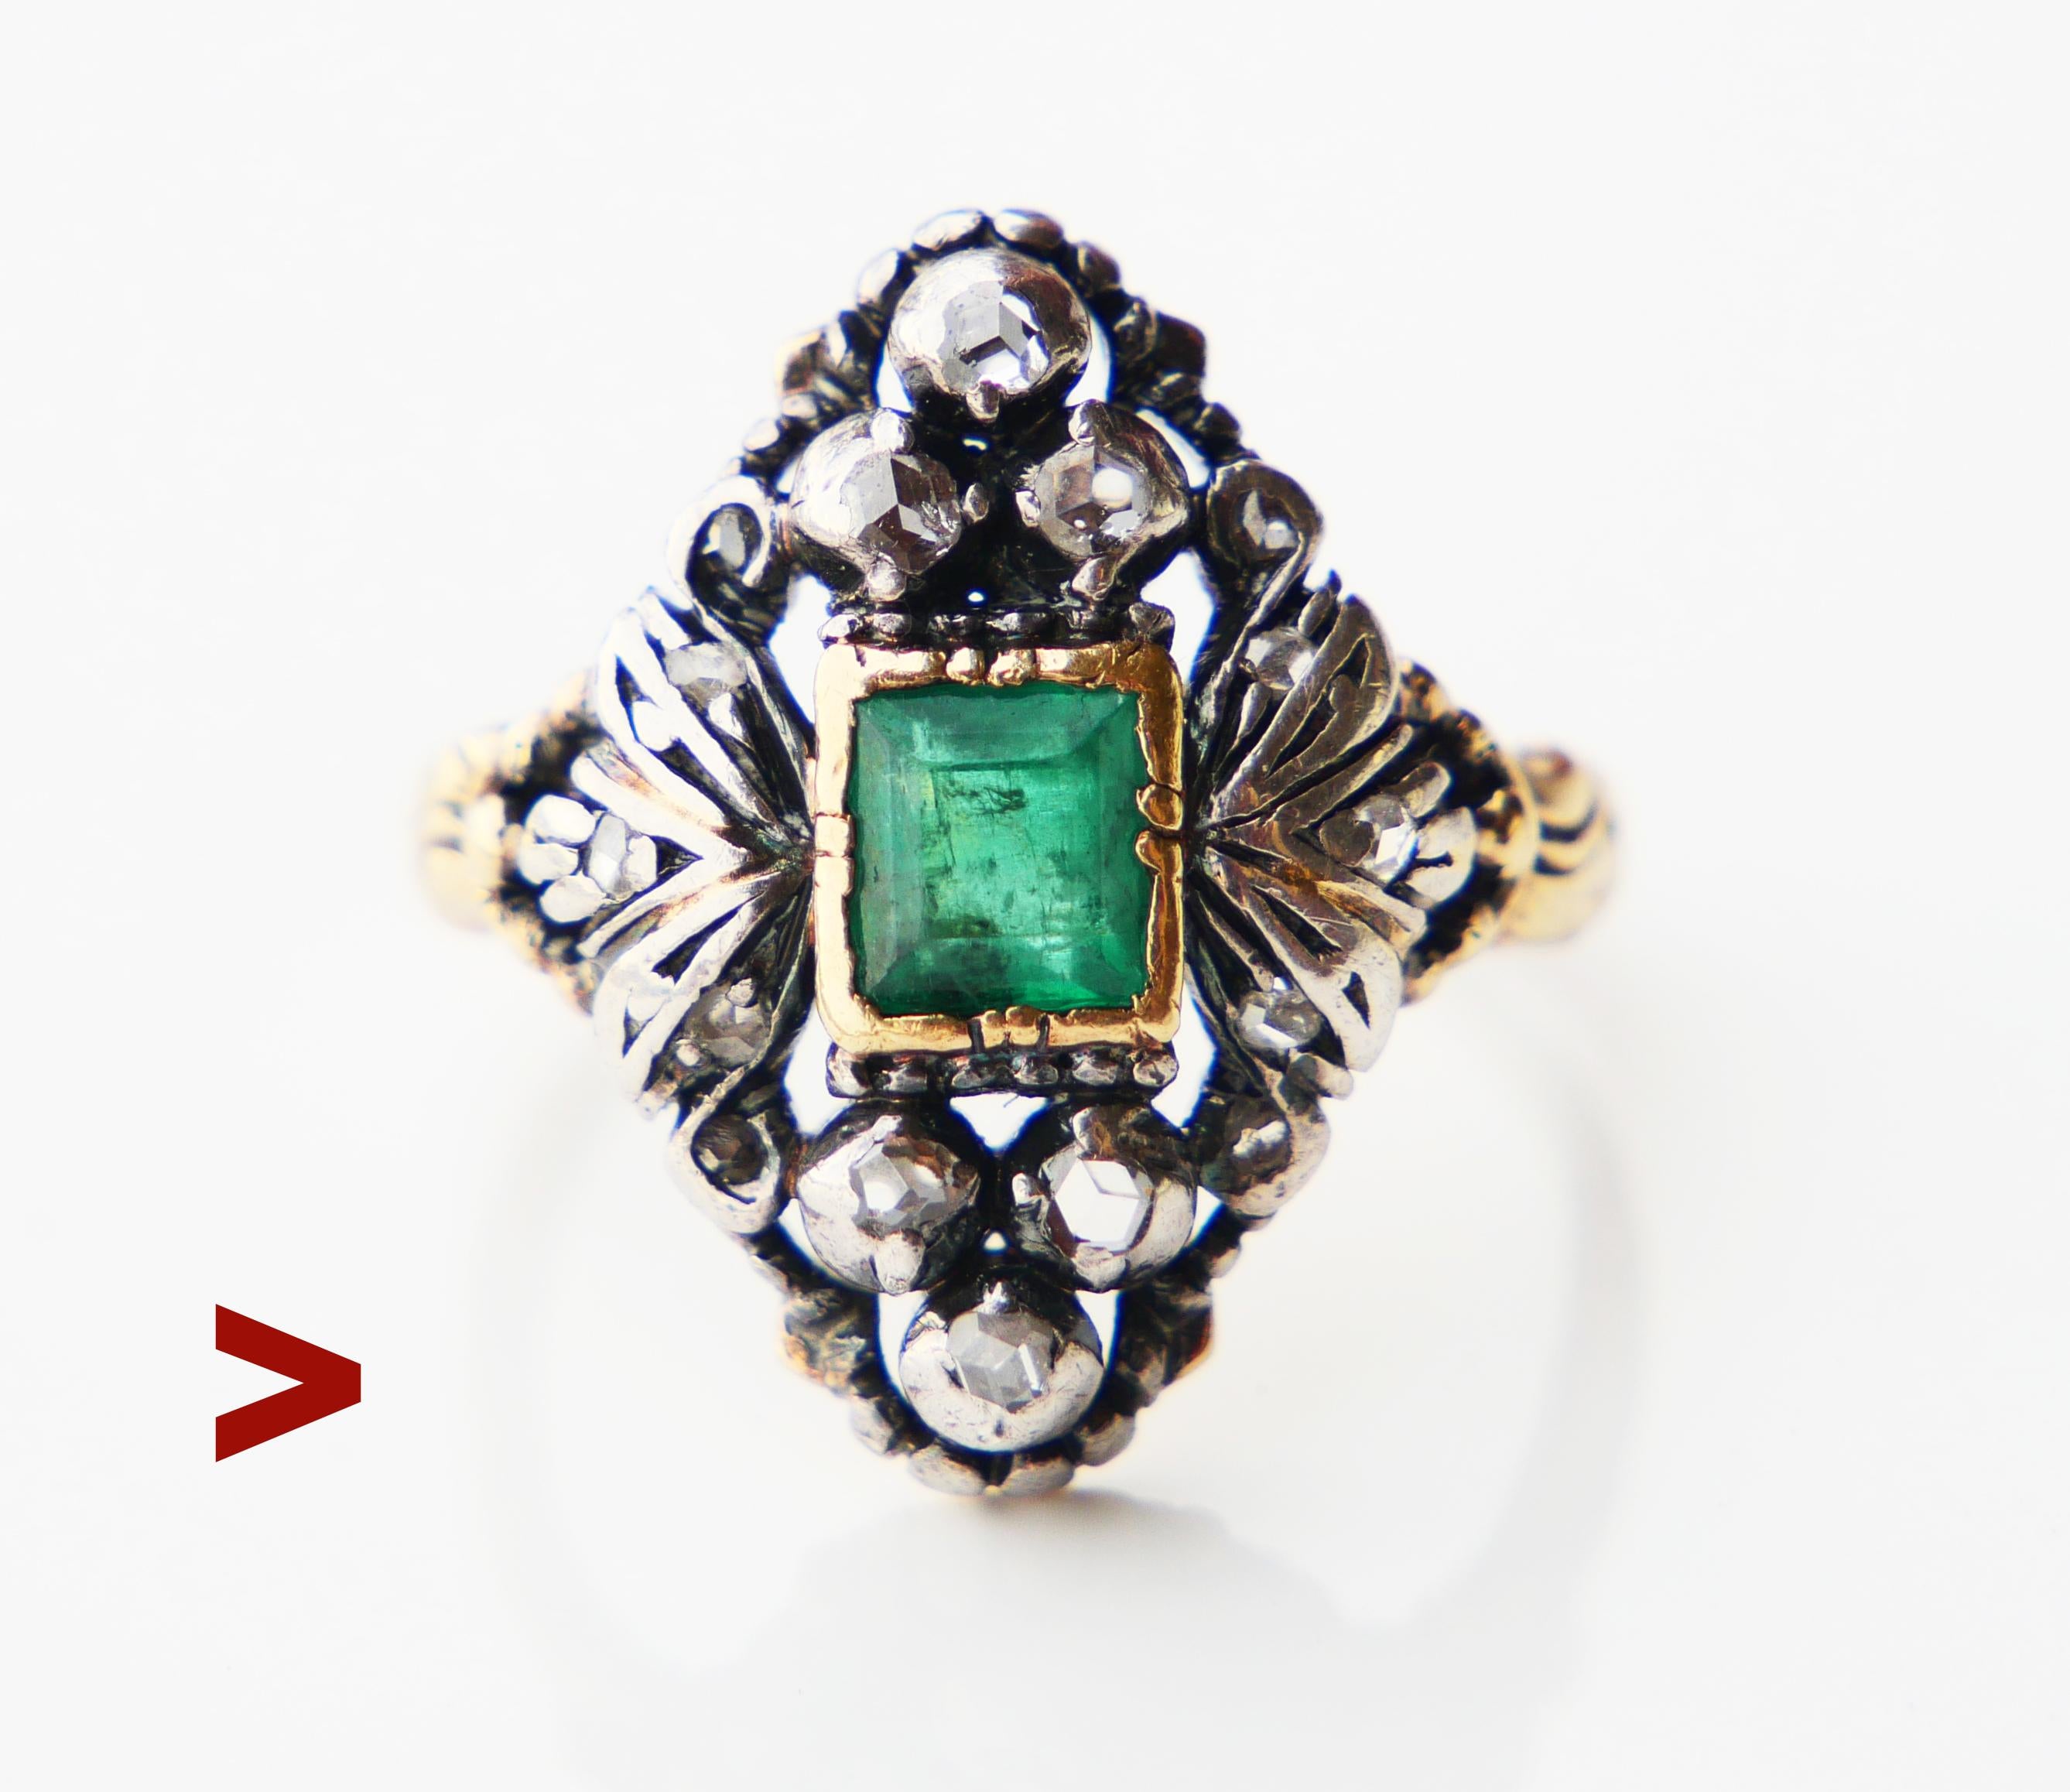 Nice Renaissance-styled cluster Ring with the carved band, shoulders, and parts of the crown in solid 18ct Yellow Gold holding natural Emerald stone and four rose-cut Diamonds set in Silver clusters.

Crown 6 mm x 5.5 mm x 5 mm deep.

Natural